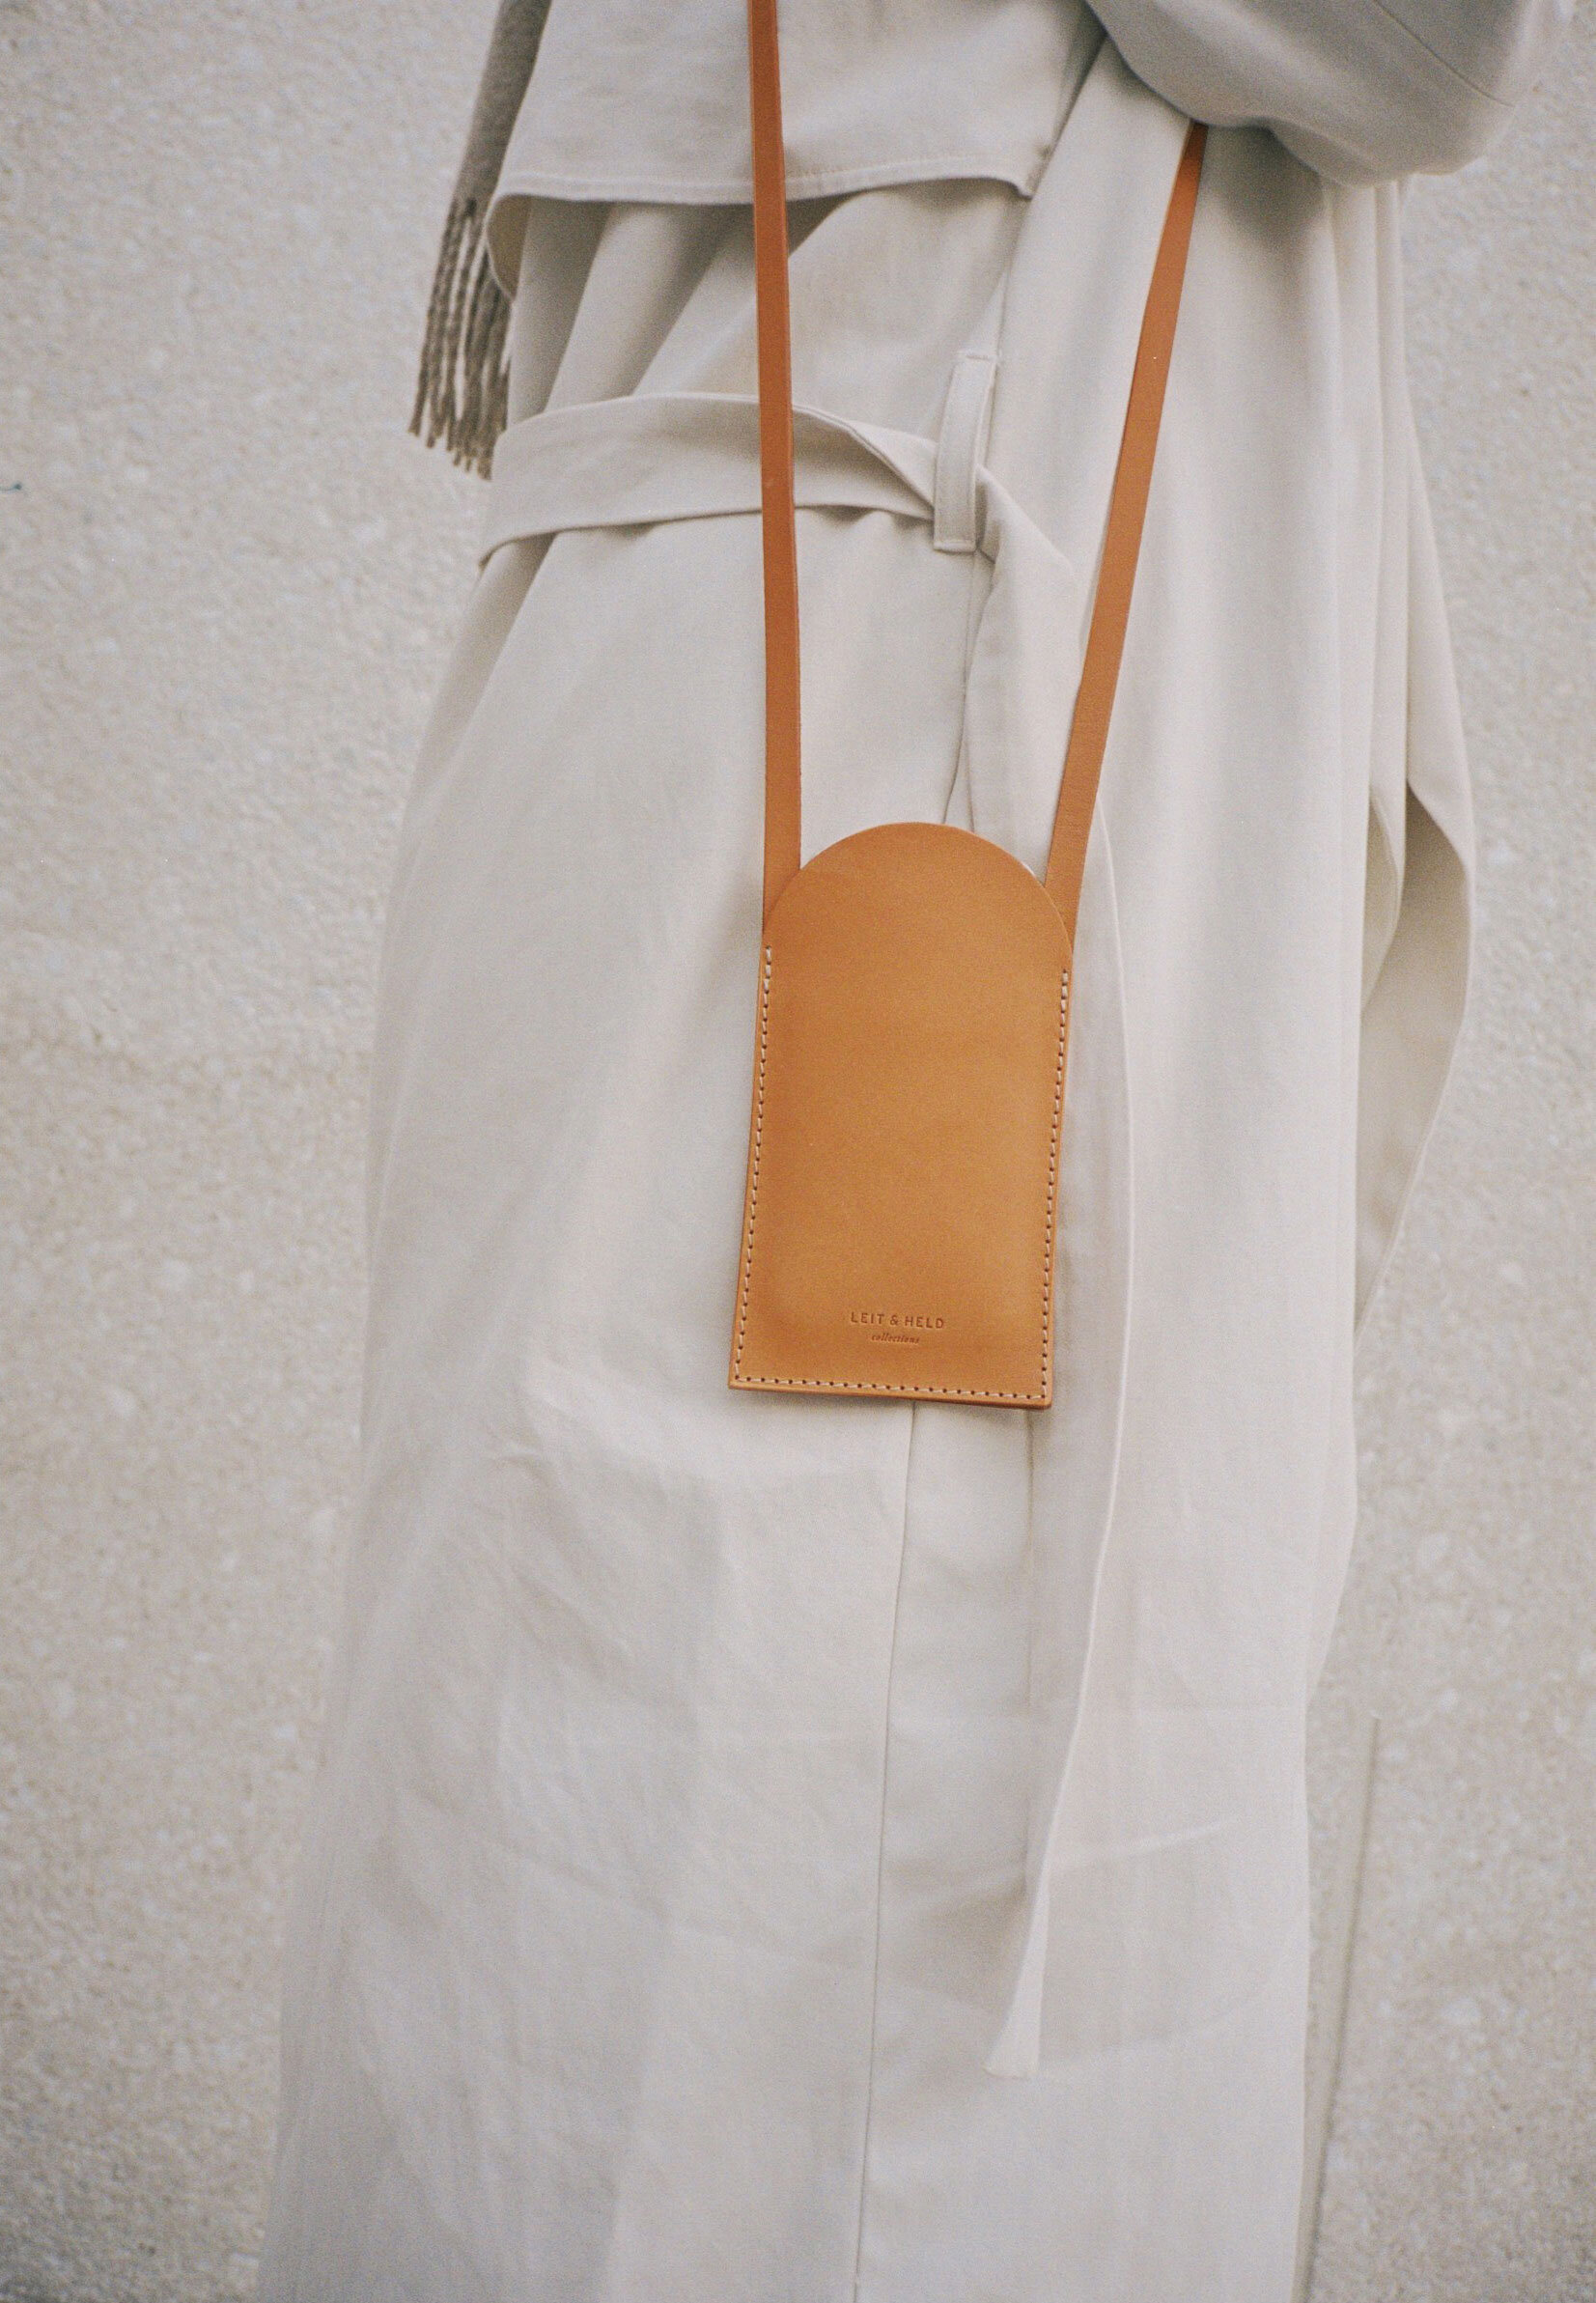 Sustainable leather bags